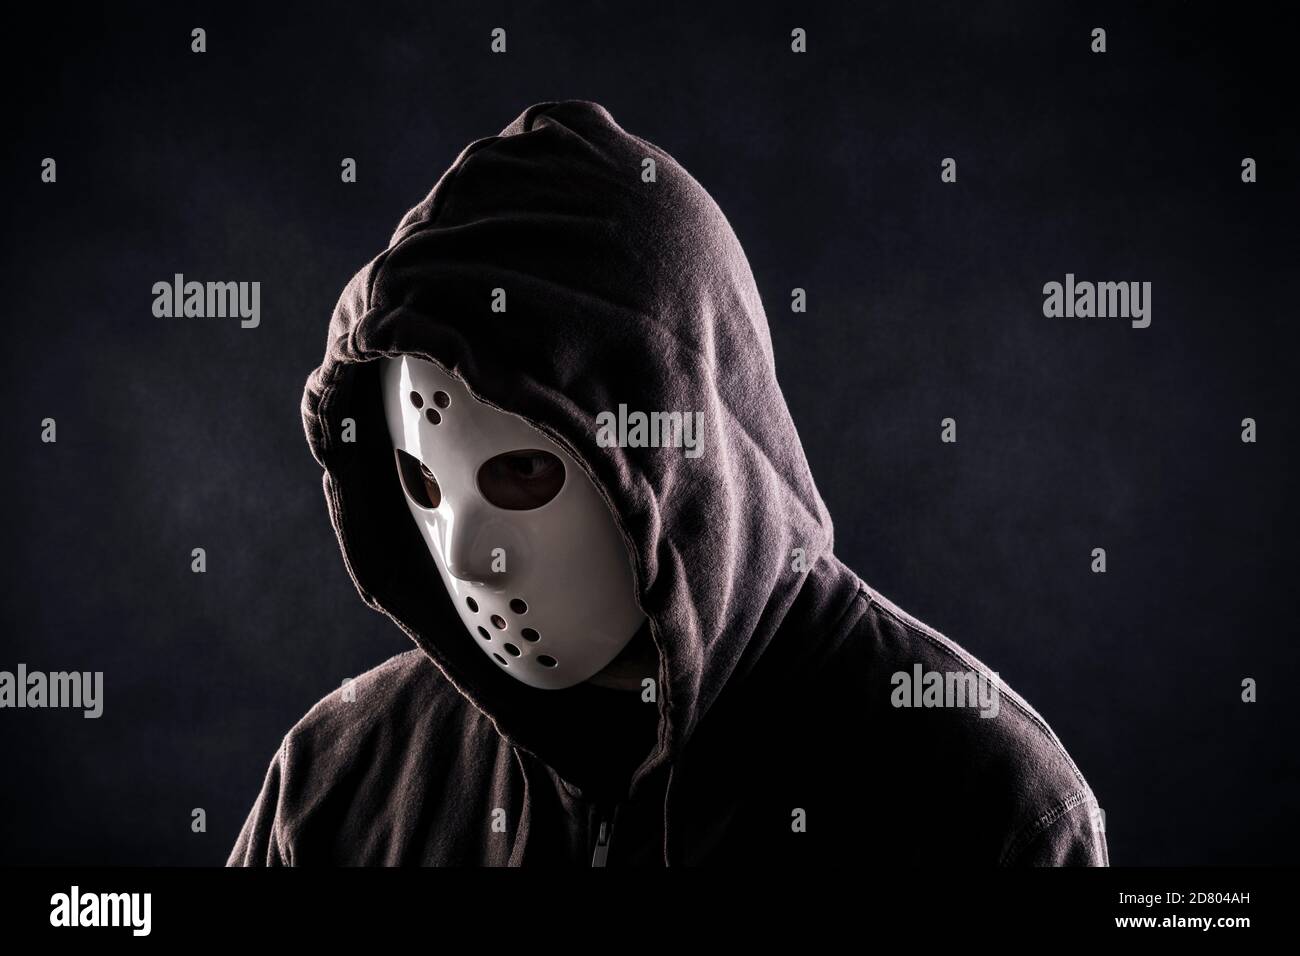 Hooded maniac or criminal in mask Stock Photo